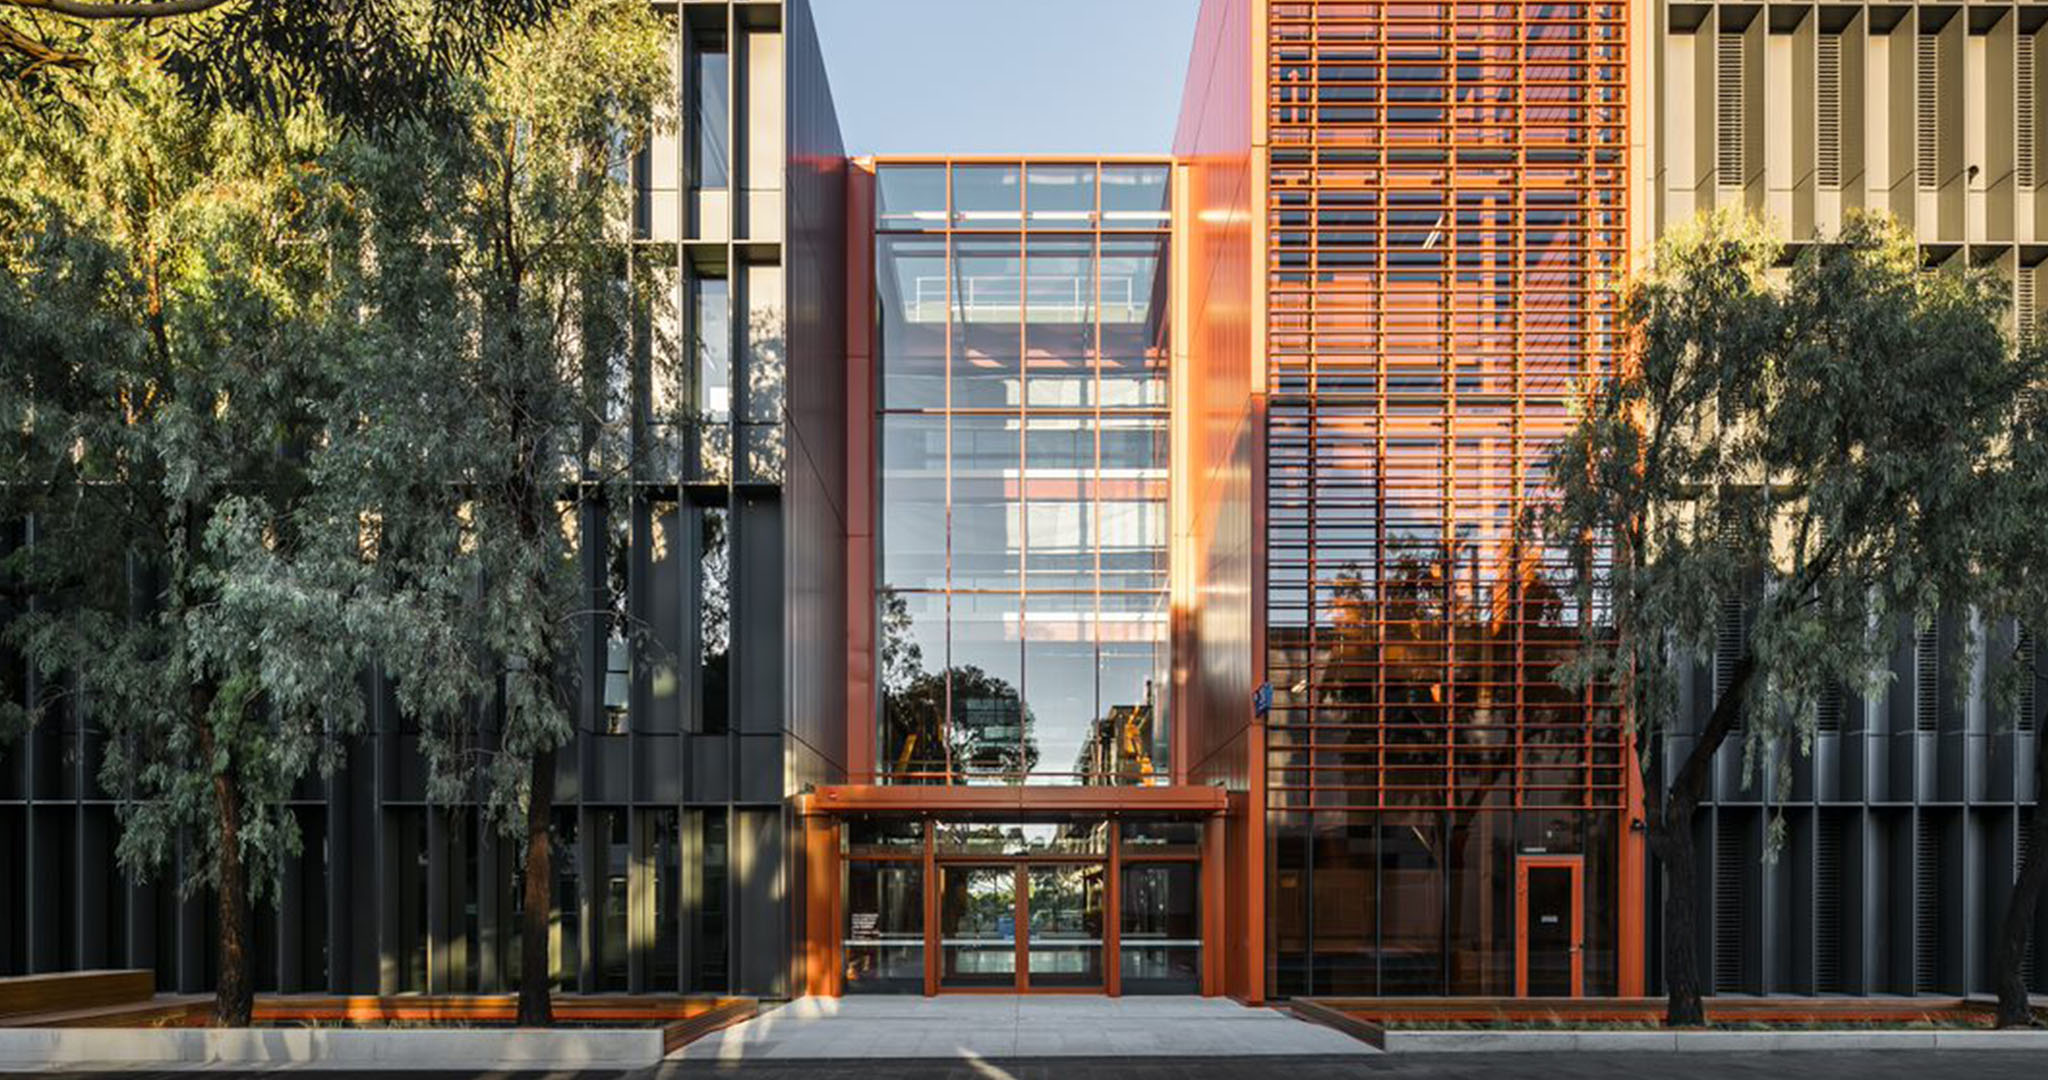 The Woodside Building for Technology and Design represents the latest thinking in tertiary education. Image courtesy of Michael Kai Photography.